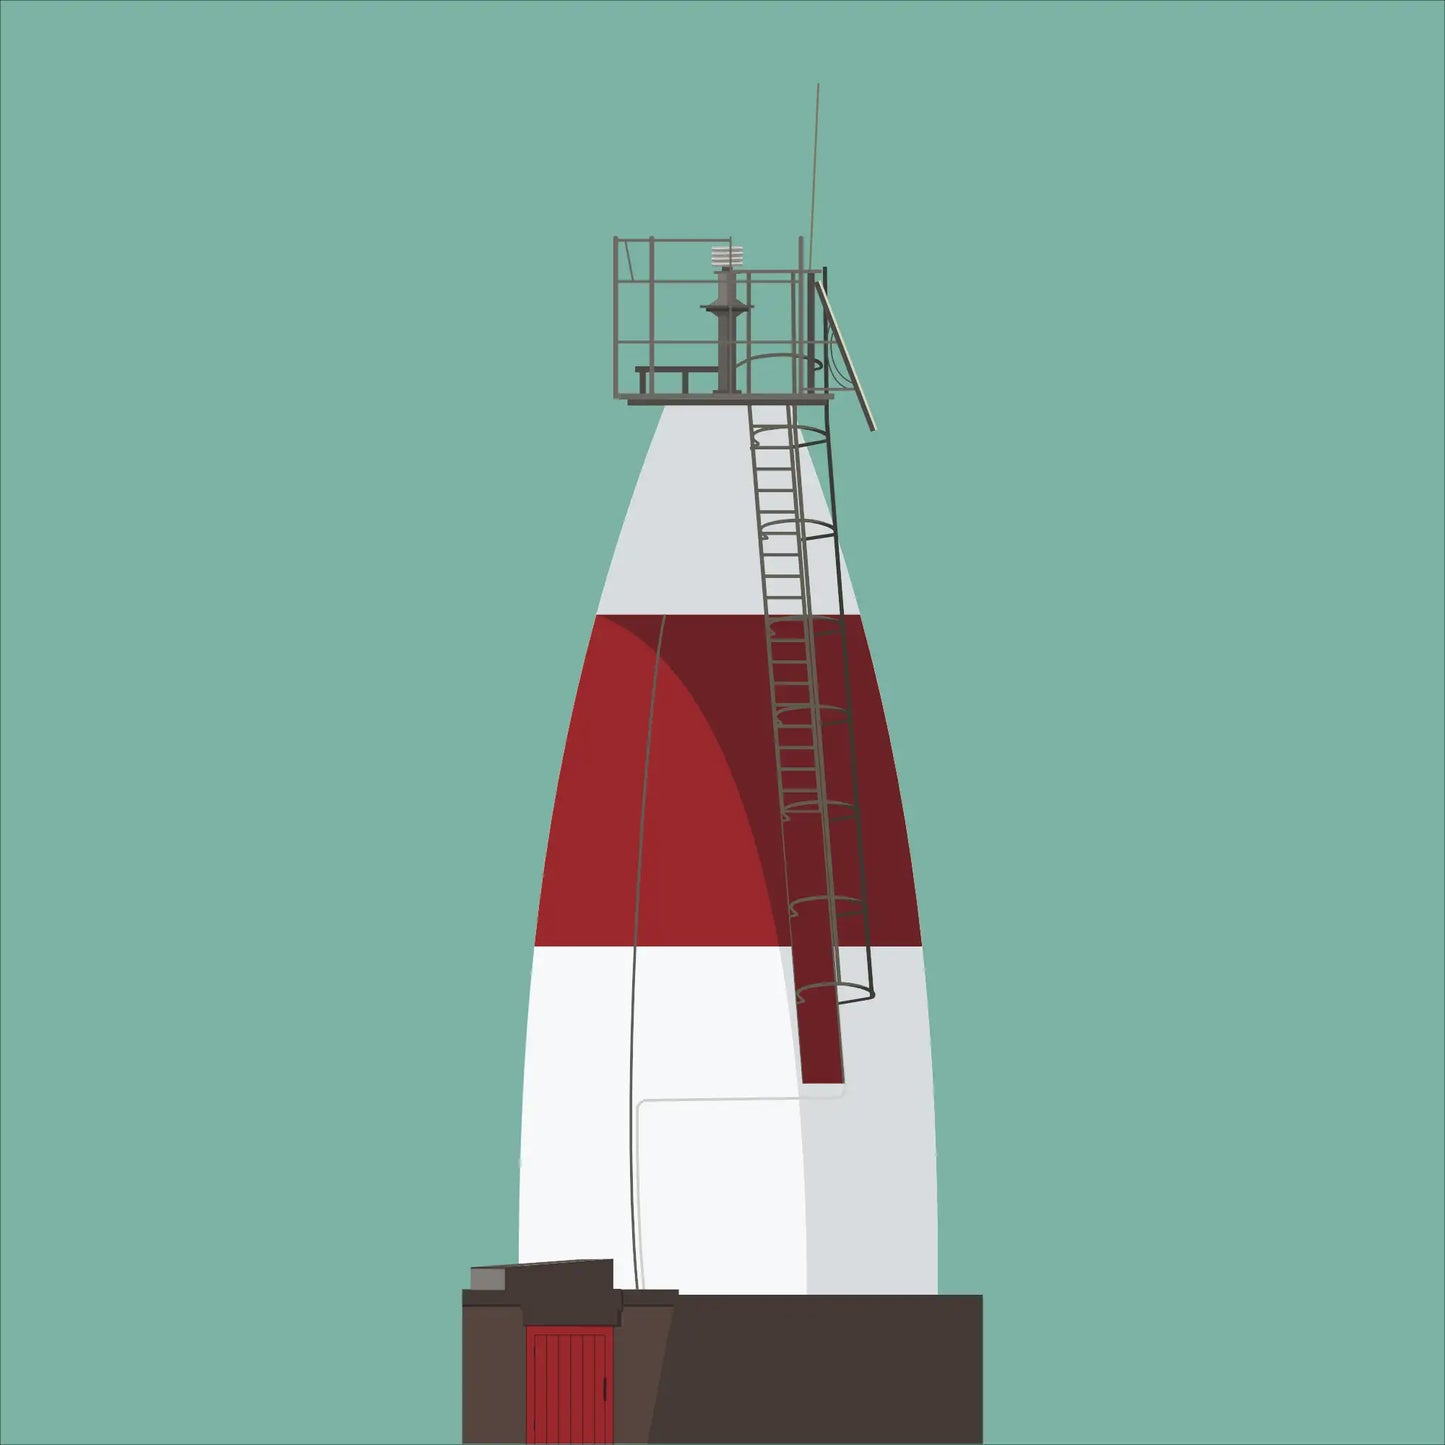 Contemporary graphic illustration of Muglins lighthouse on a white background inside light blue square.